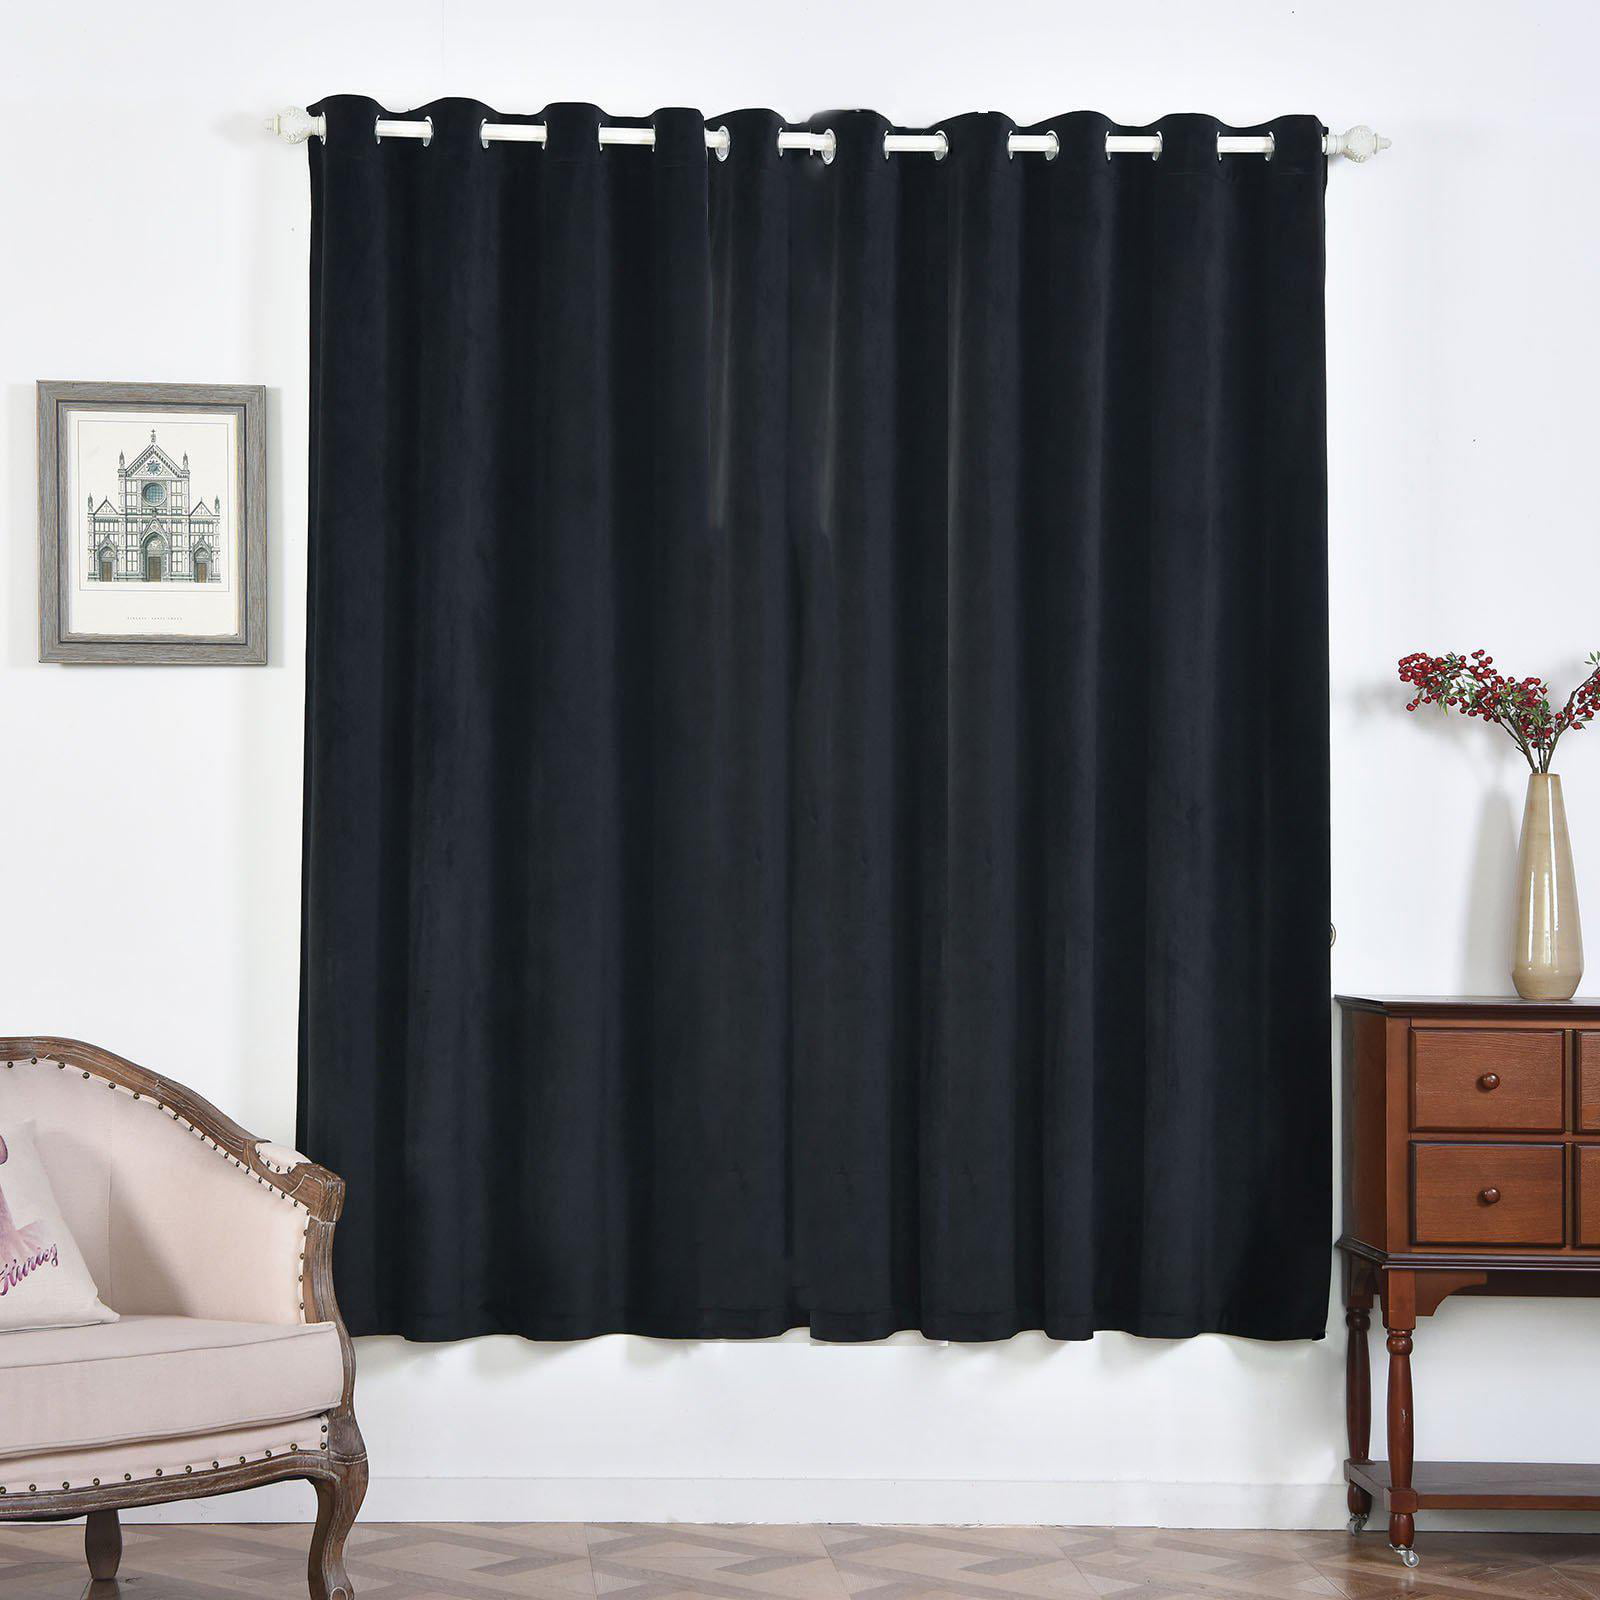 Black Soundproof Curtains | 2 Packs | 52 x 84 Inch Blackout Curtains